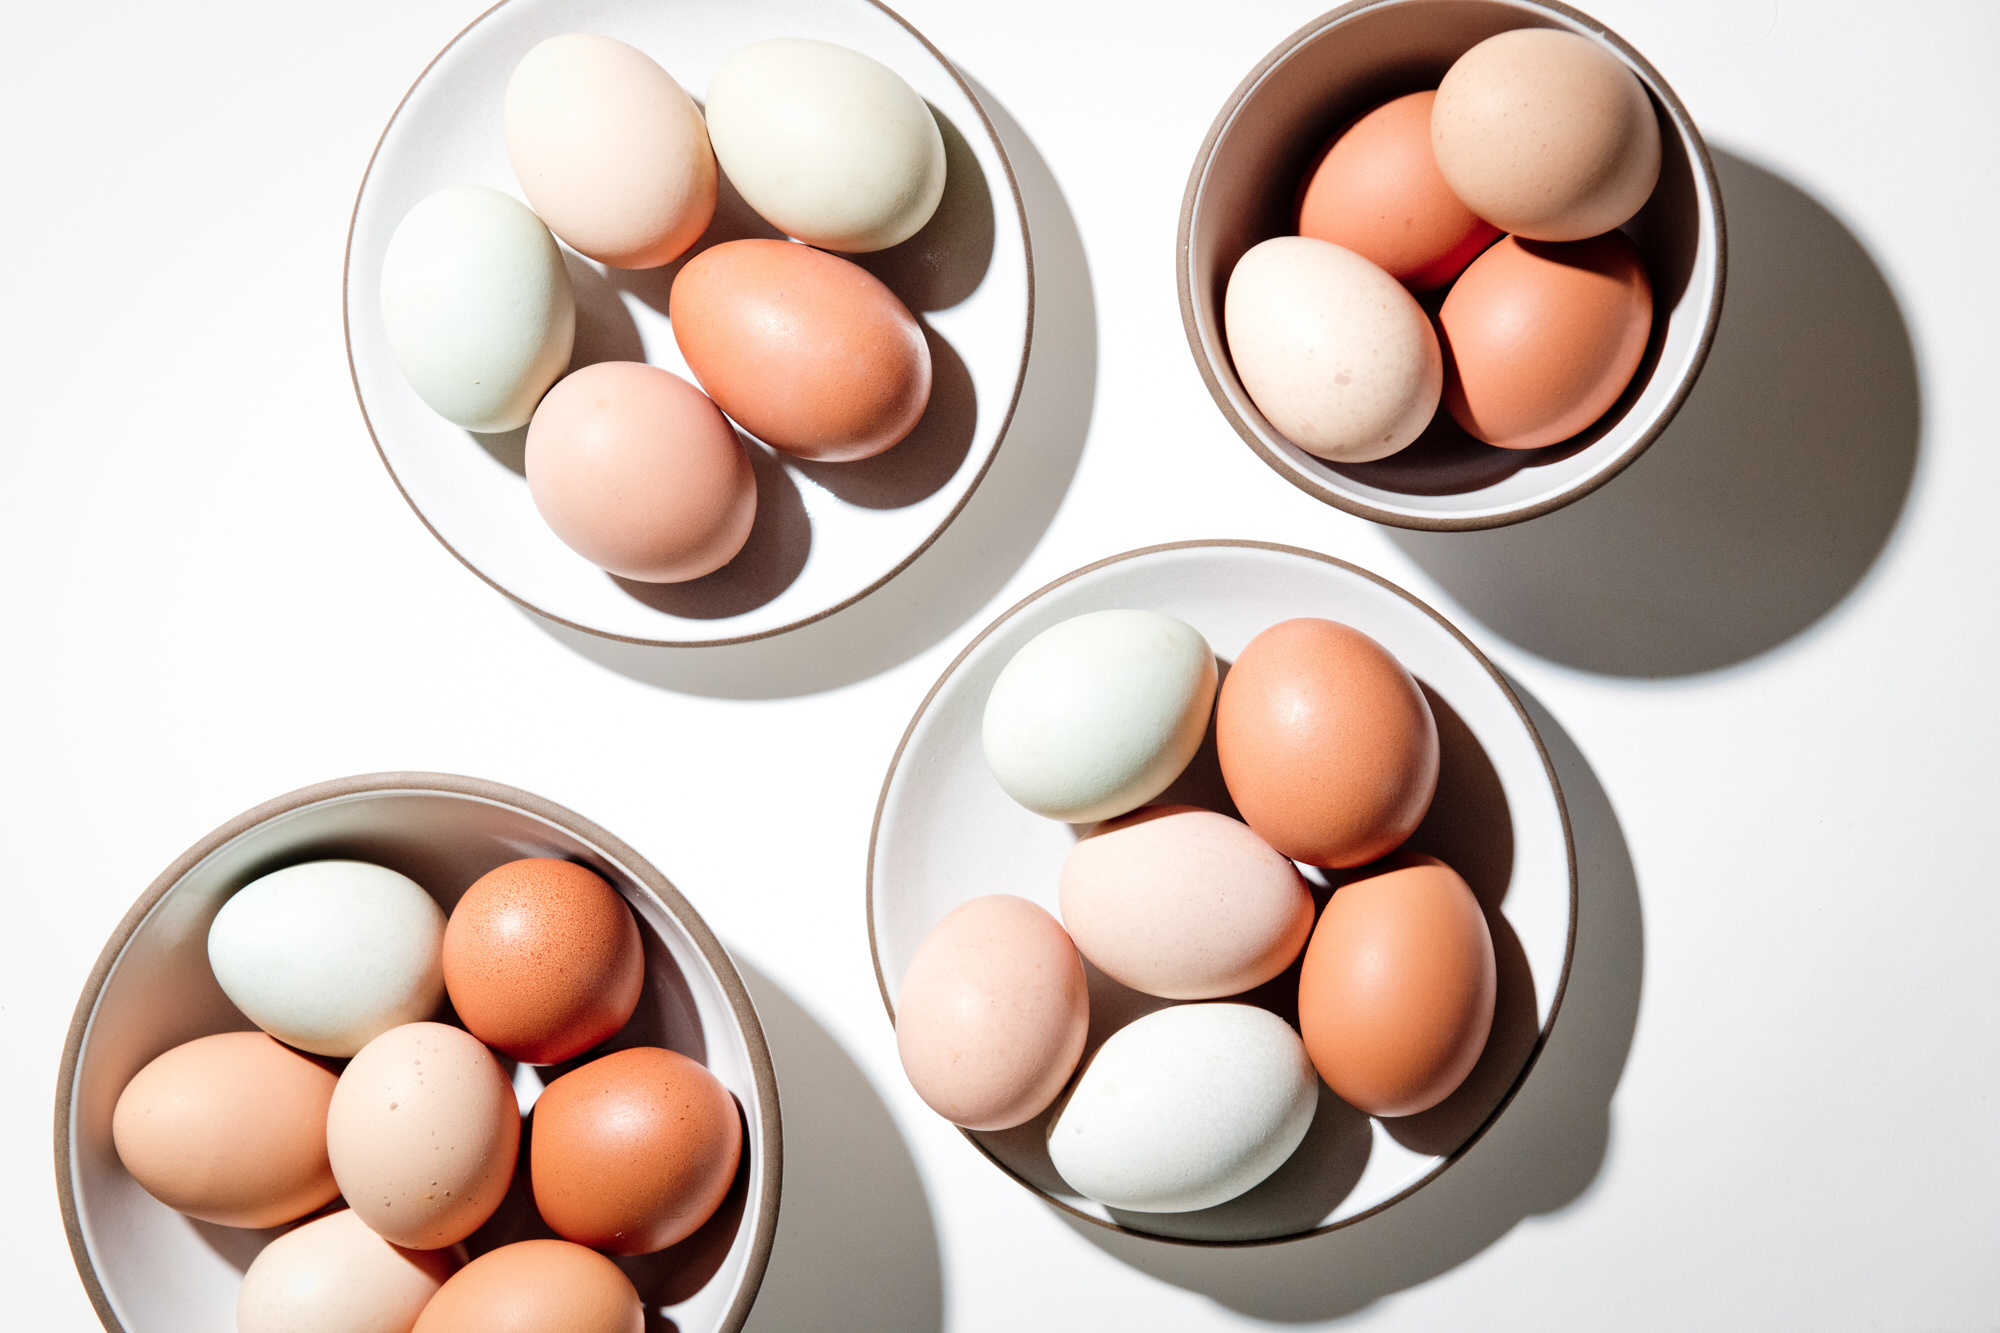 Who Is The Rotten Egg? - Leadership Dynamics